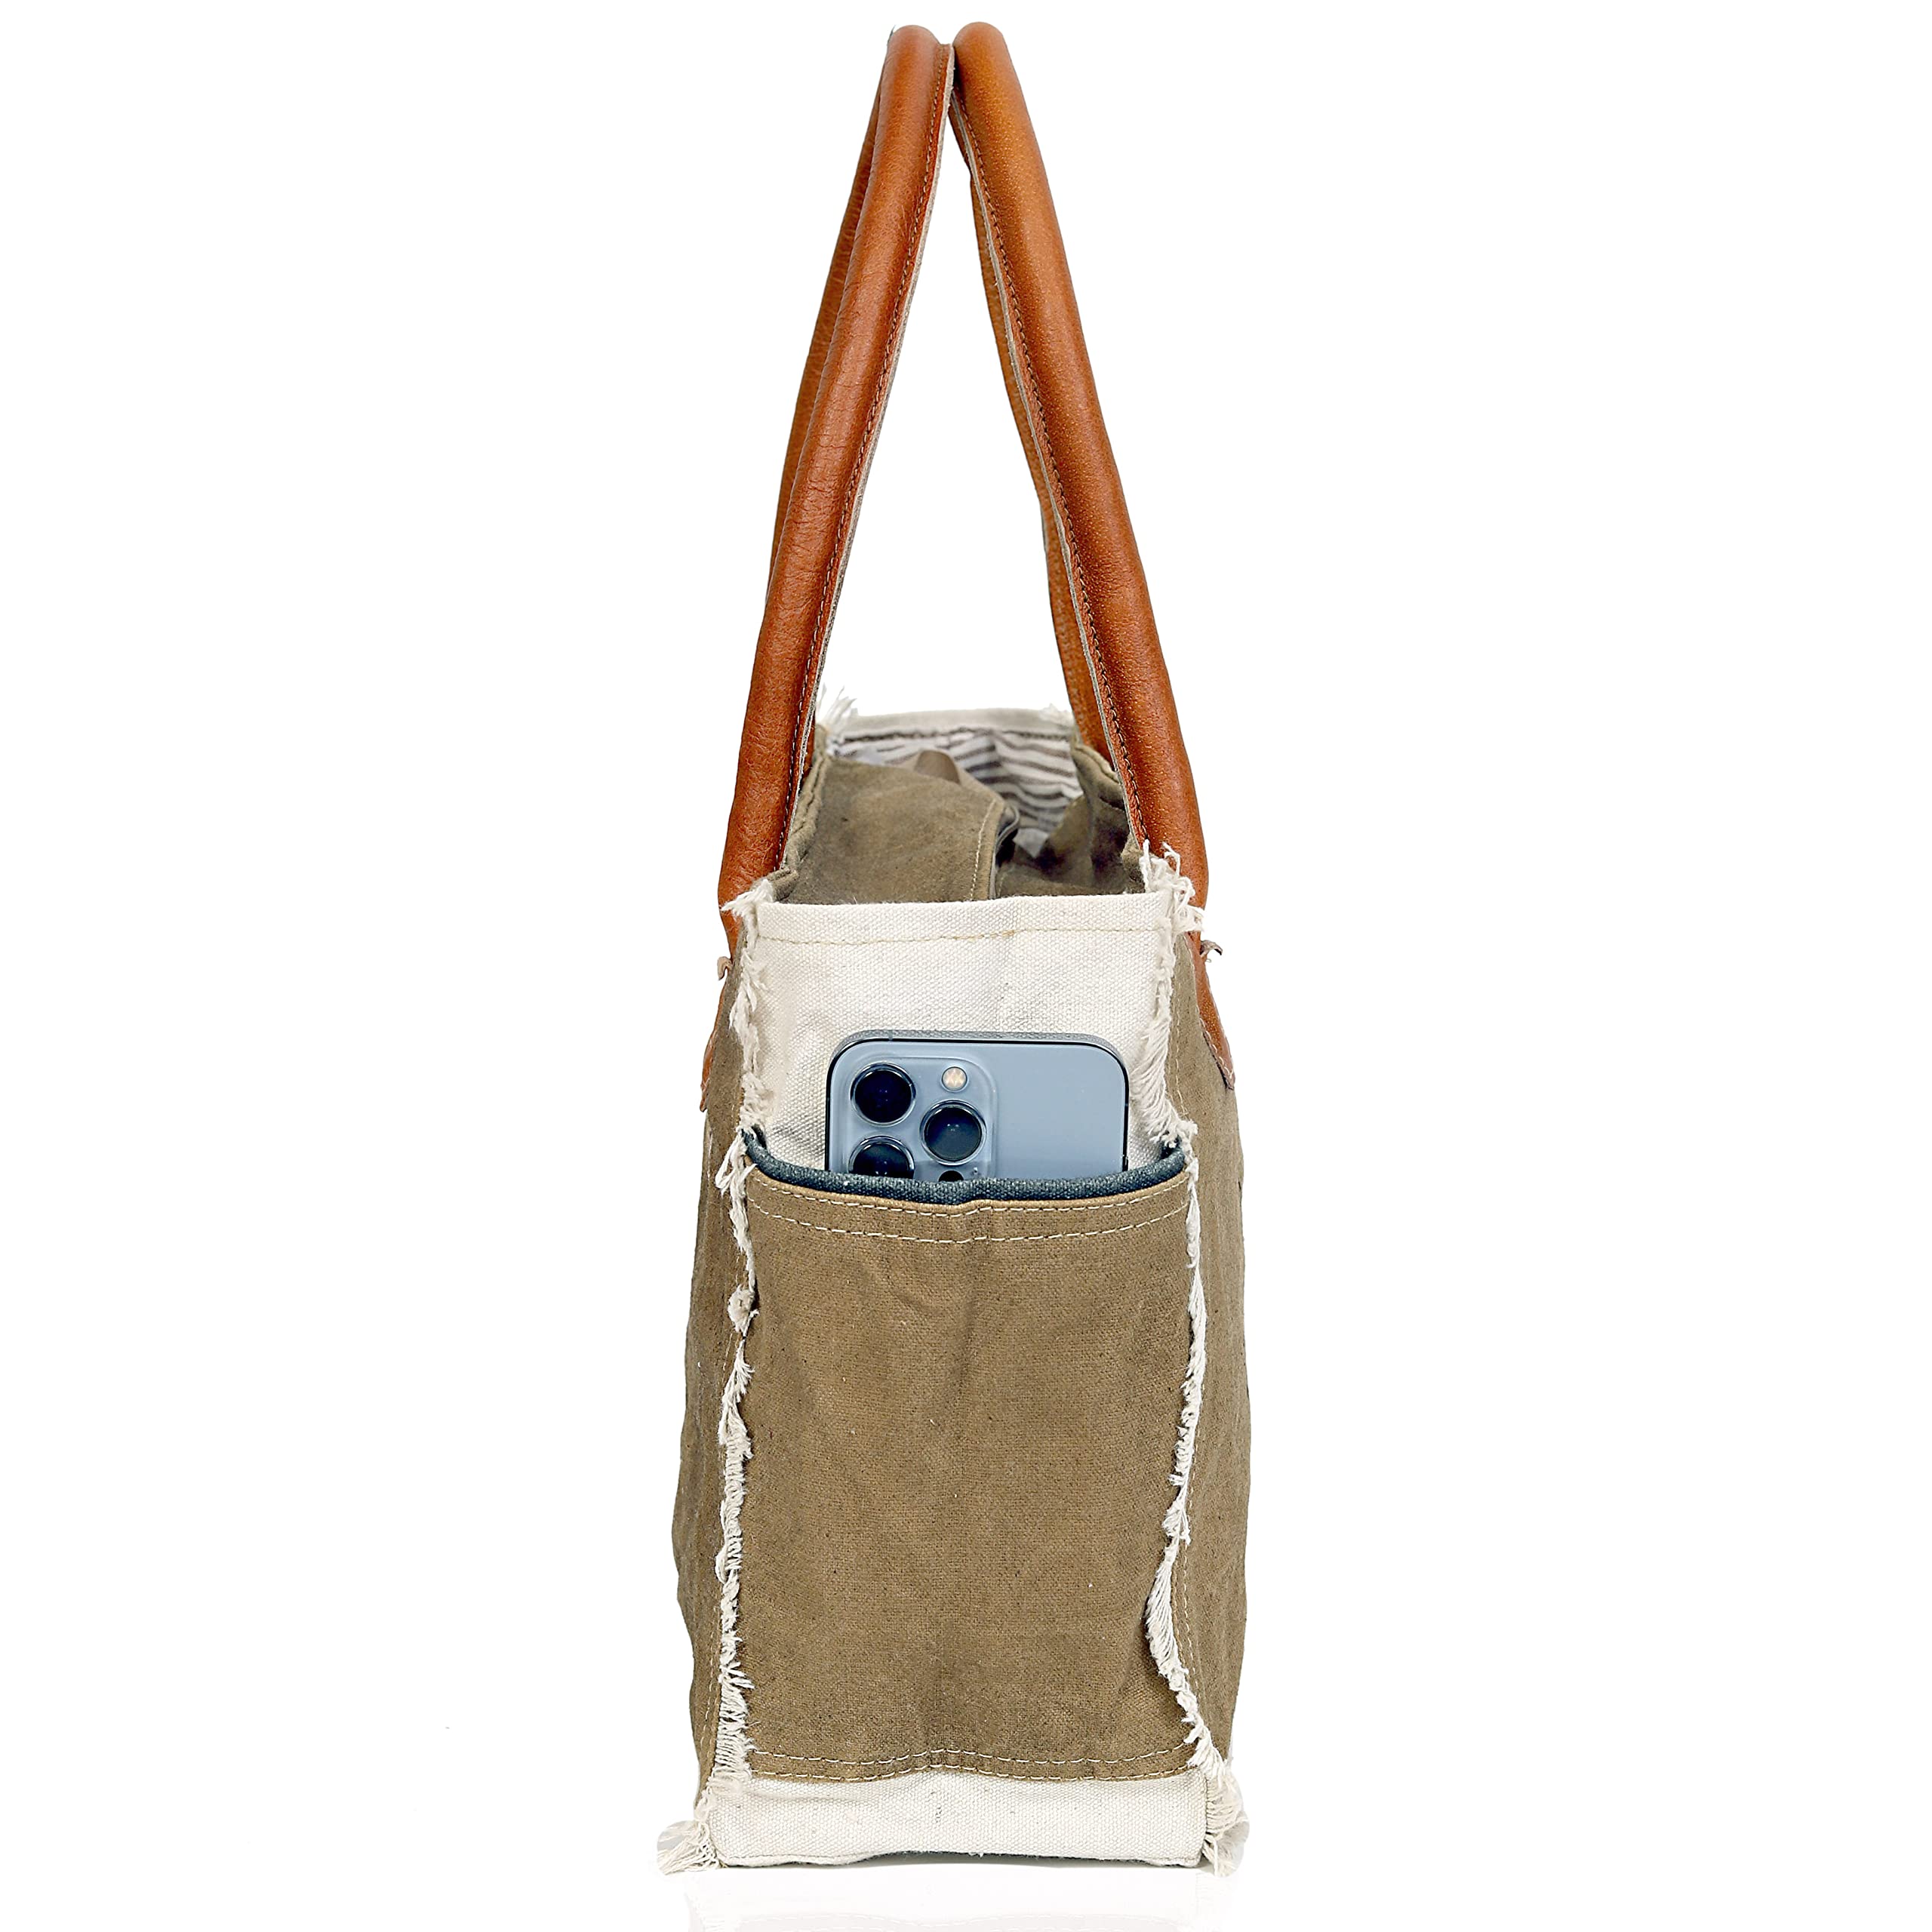 CLA Bags Sel De Mer Upcycled Canvas Hand Bag Upcycled Canvas & Cowhide Tote Bag Radiant Upcycled Canvas & Cowhide Leather Bag